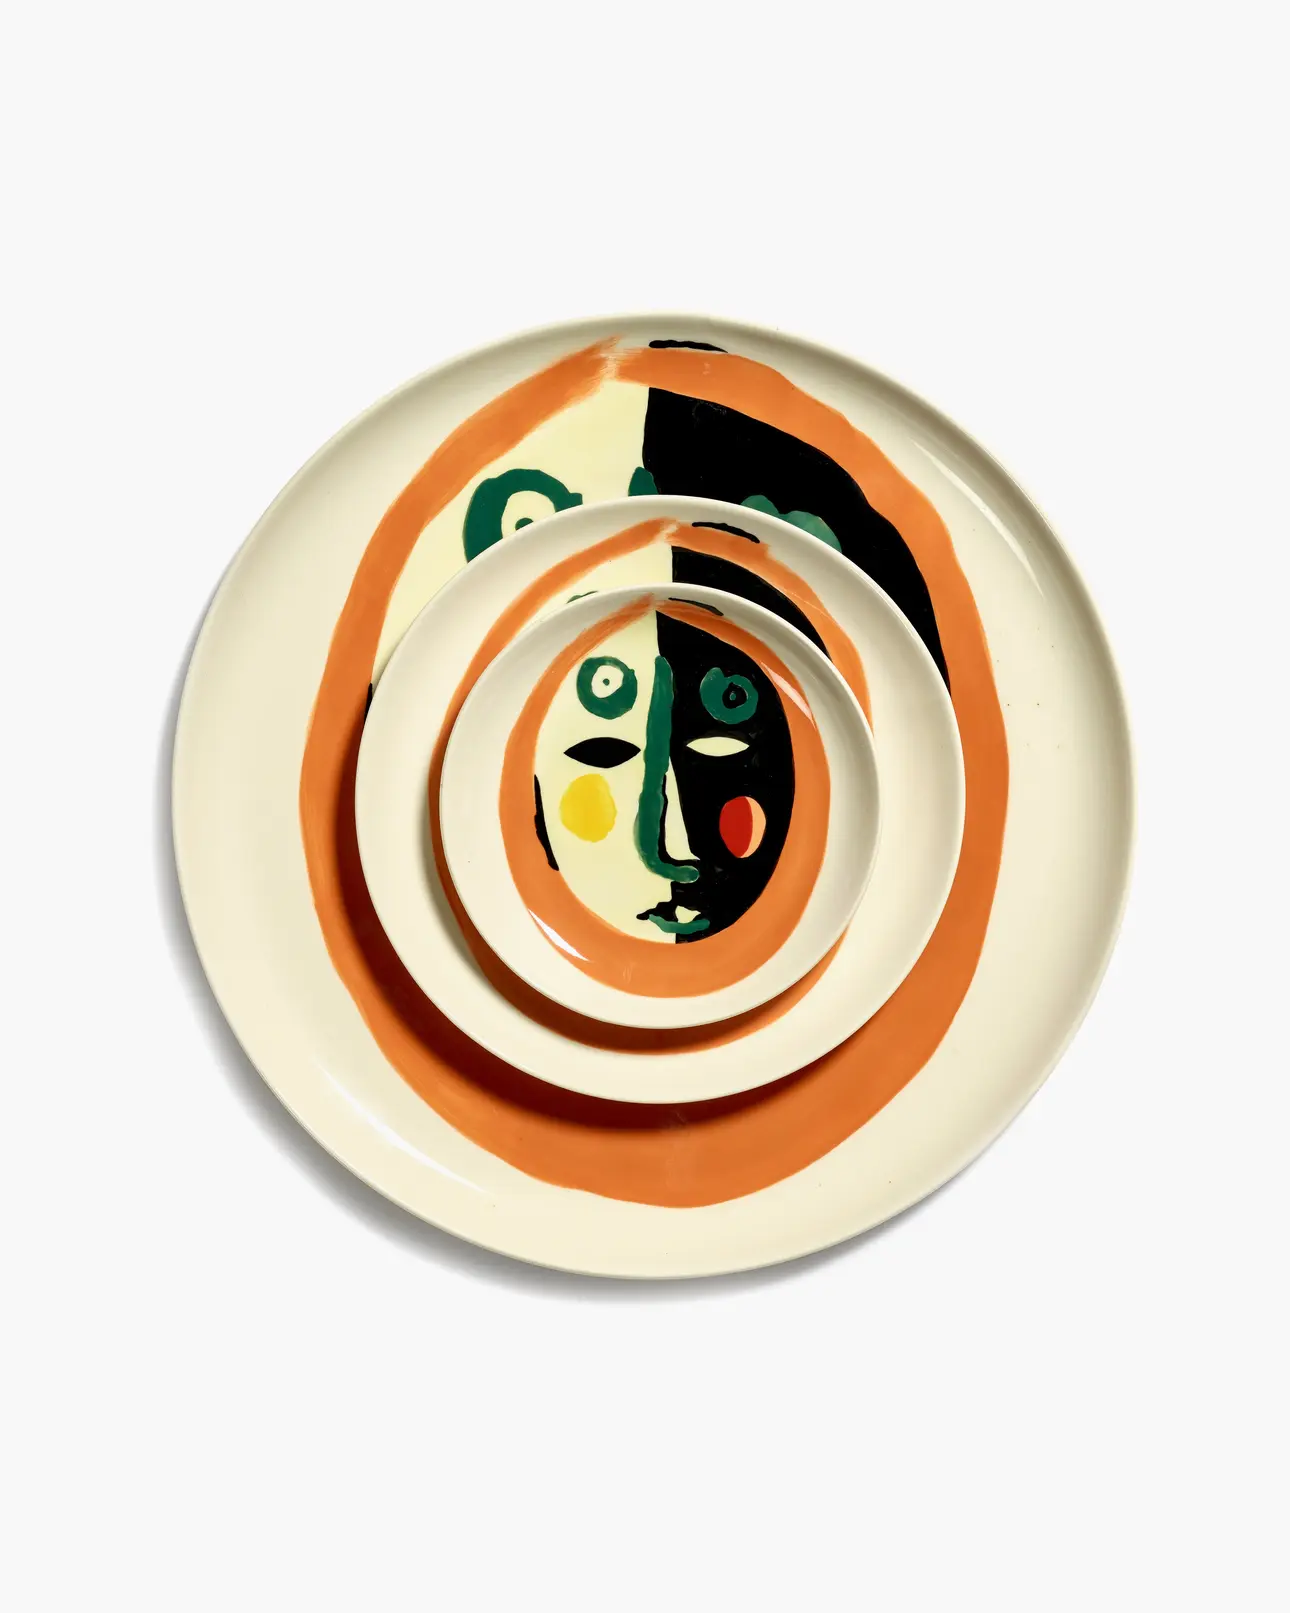 Feast dinnerware by Ottolenghi for Serax